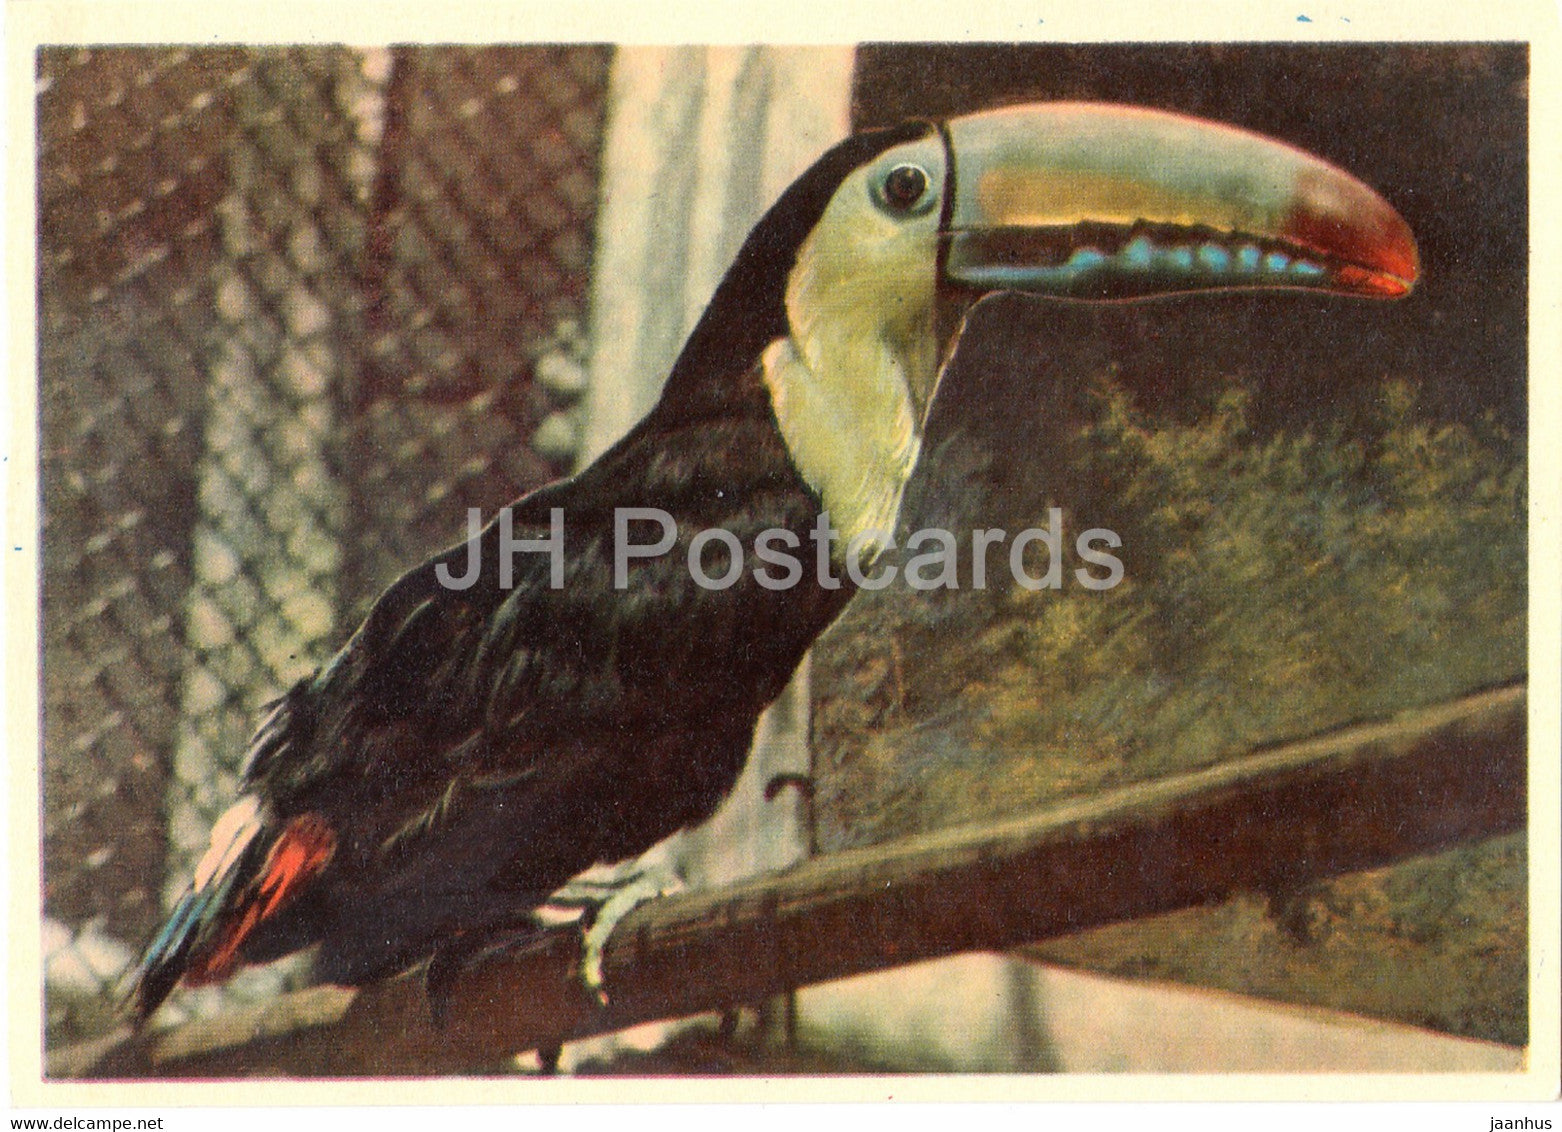 Toucan - birds - Moscow Zoo - 1963 - Russia USSR - unused - JH Postcards